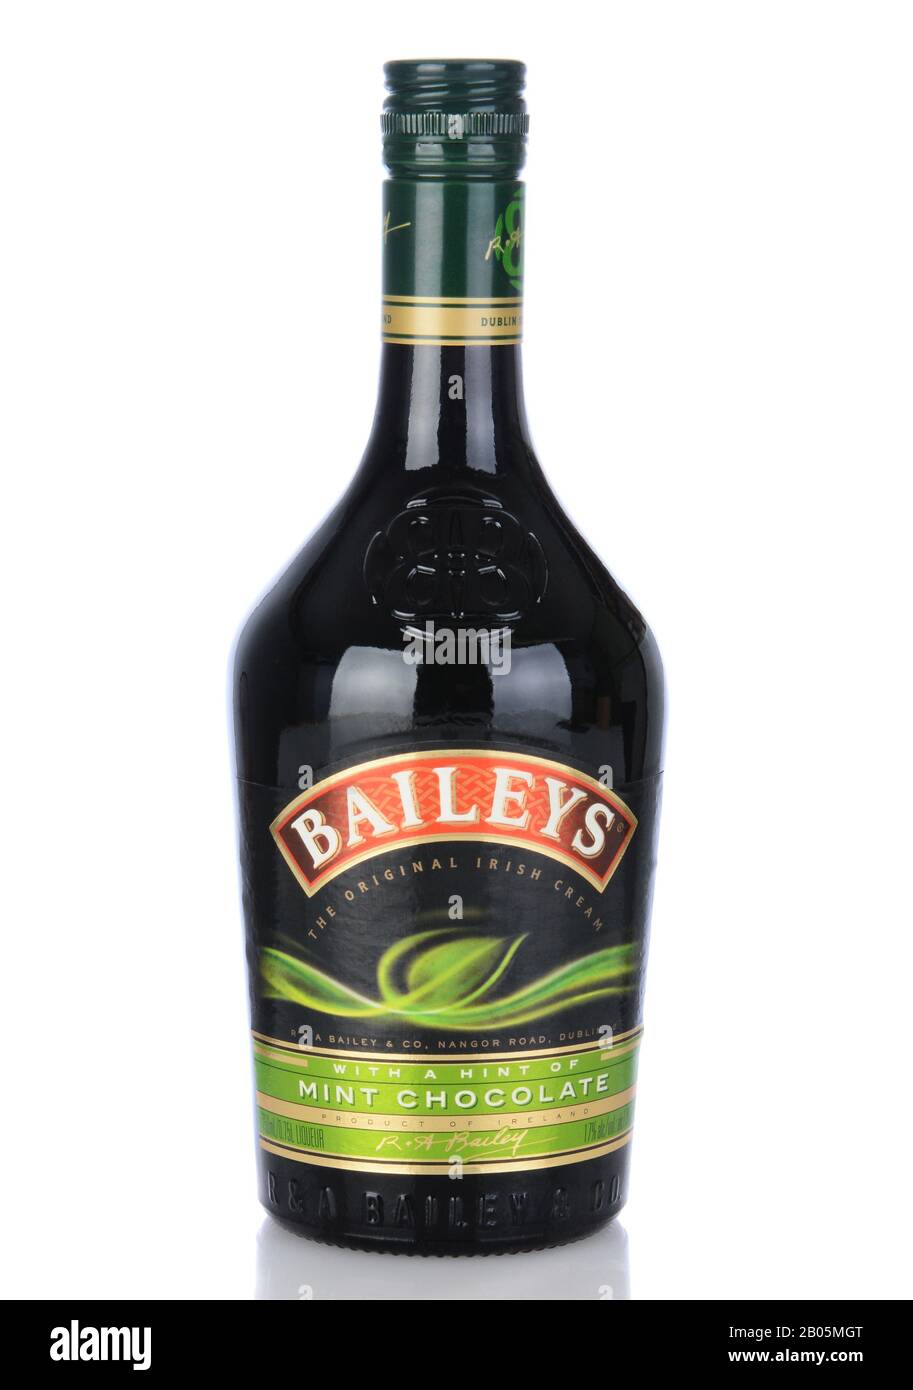 IRVINE, CA - January 11, 2013: A bottle of Baileys Mint Chocolate Irish Cream Liqueur. Baileys, introduced in 1974, was the first Irish Cream to be br Stock Photo